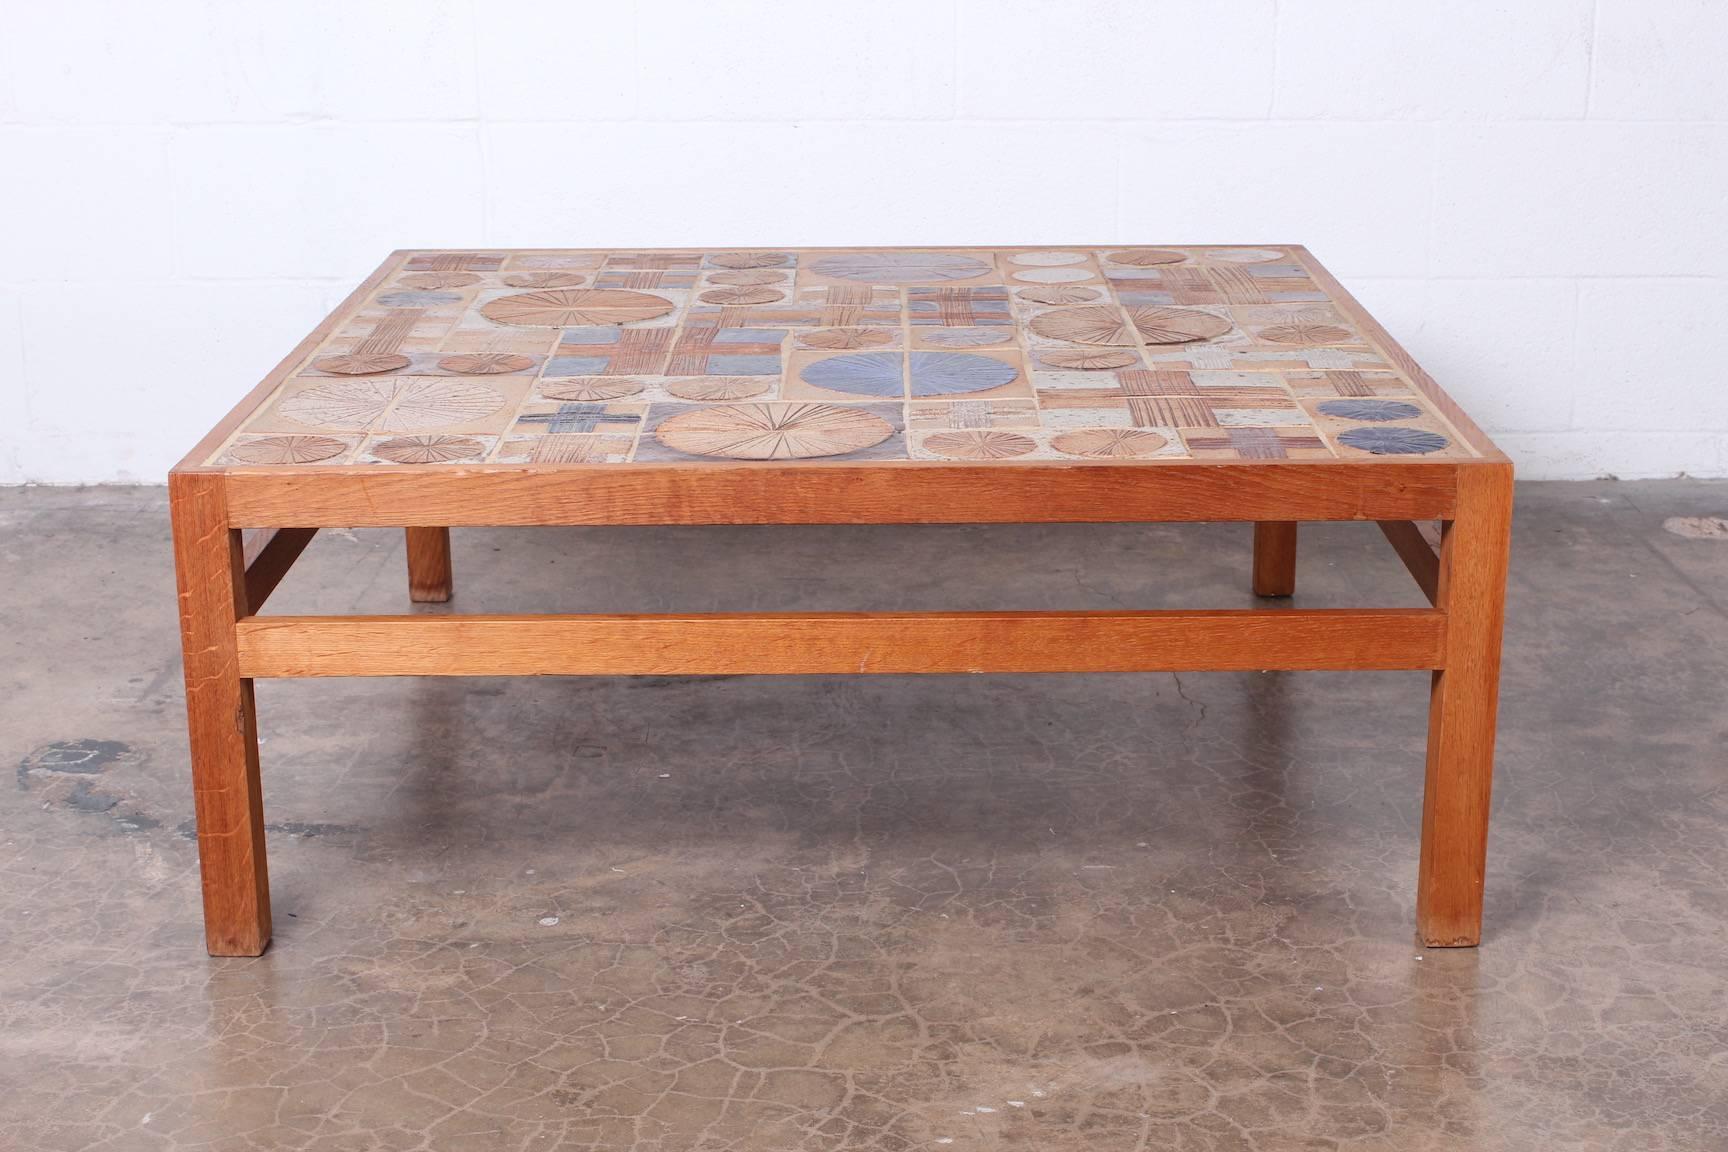 Teak coffee table with inset ceramic tiles by Tue Poulsen & Willy Beck.